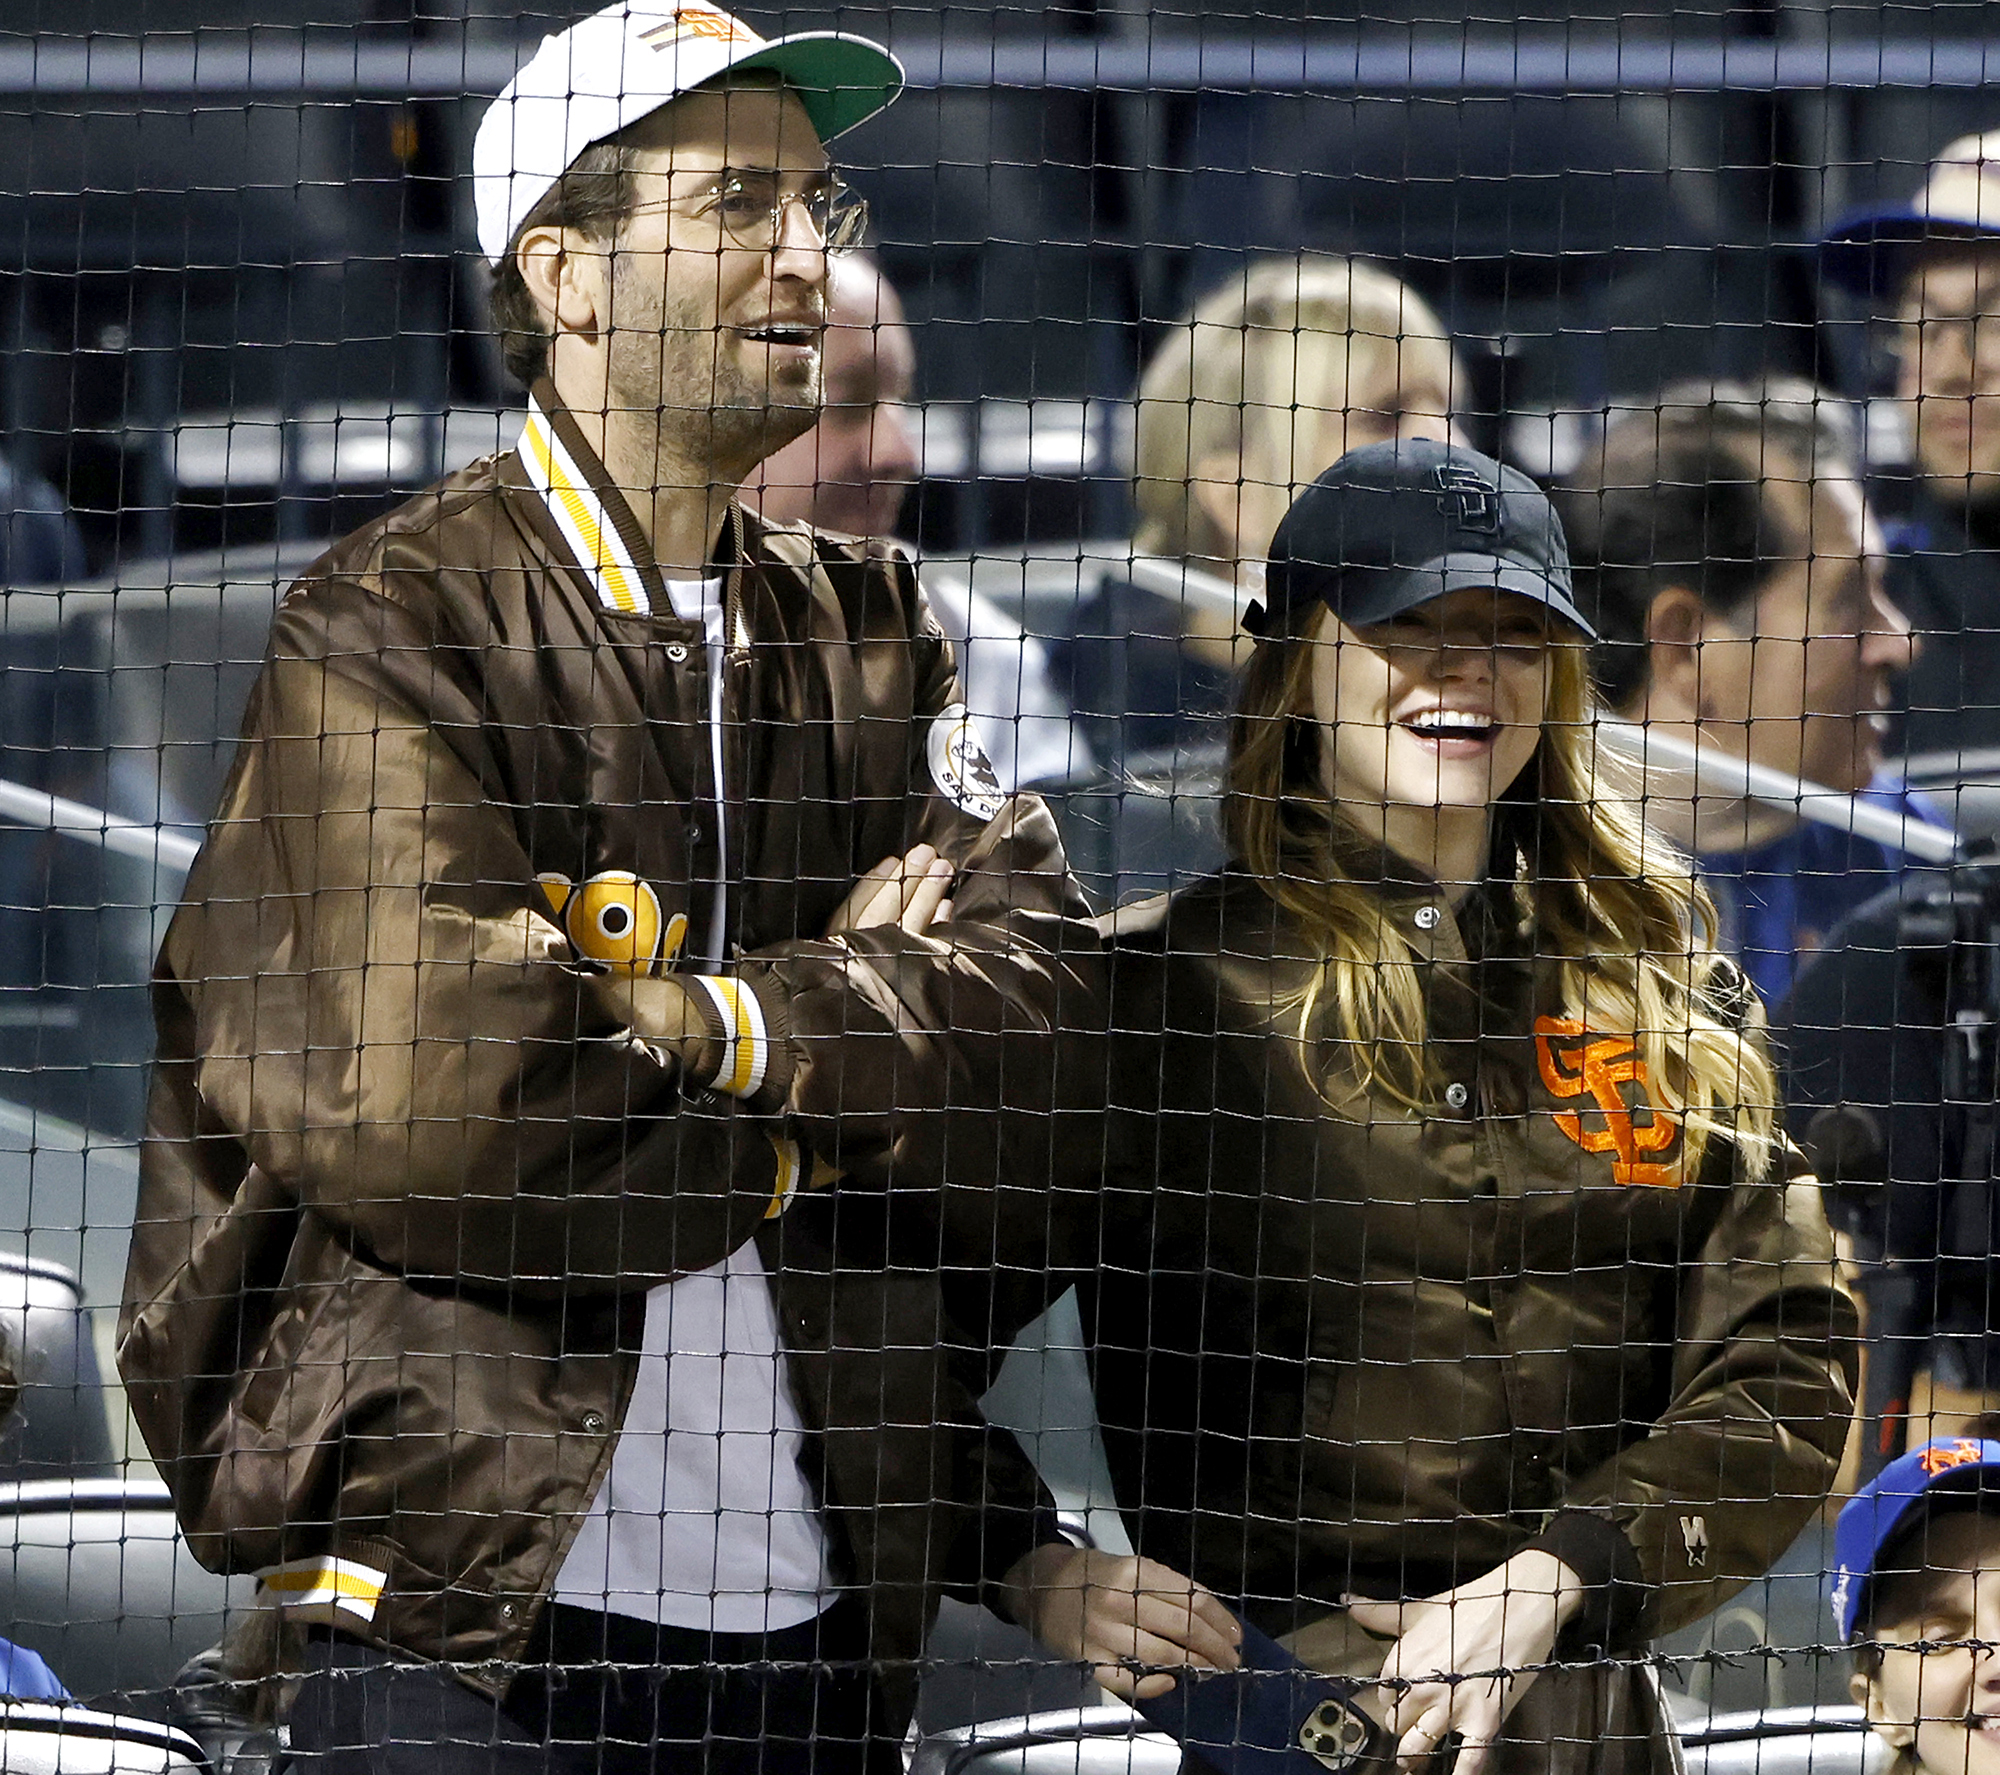 Emma Stone, Dave McCary React to Boos at Mets-Padres Game: Pic